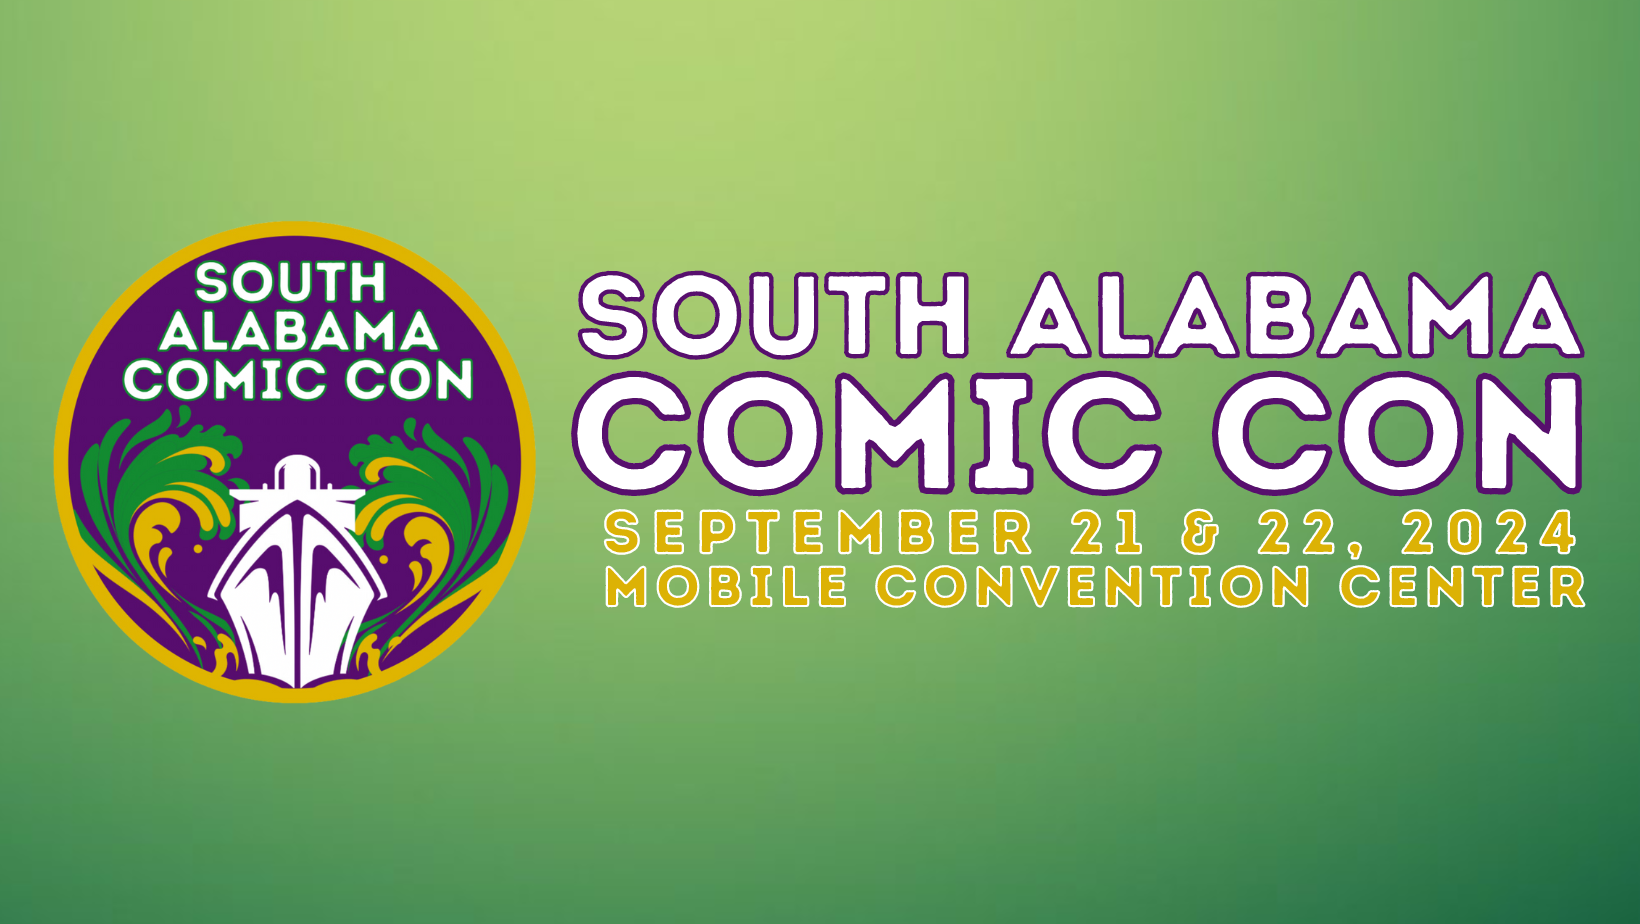 South Alabama Comic Con 2024 Tickets at Mobile Convention Center in